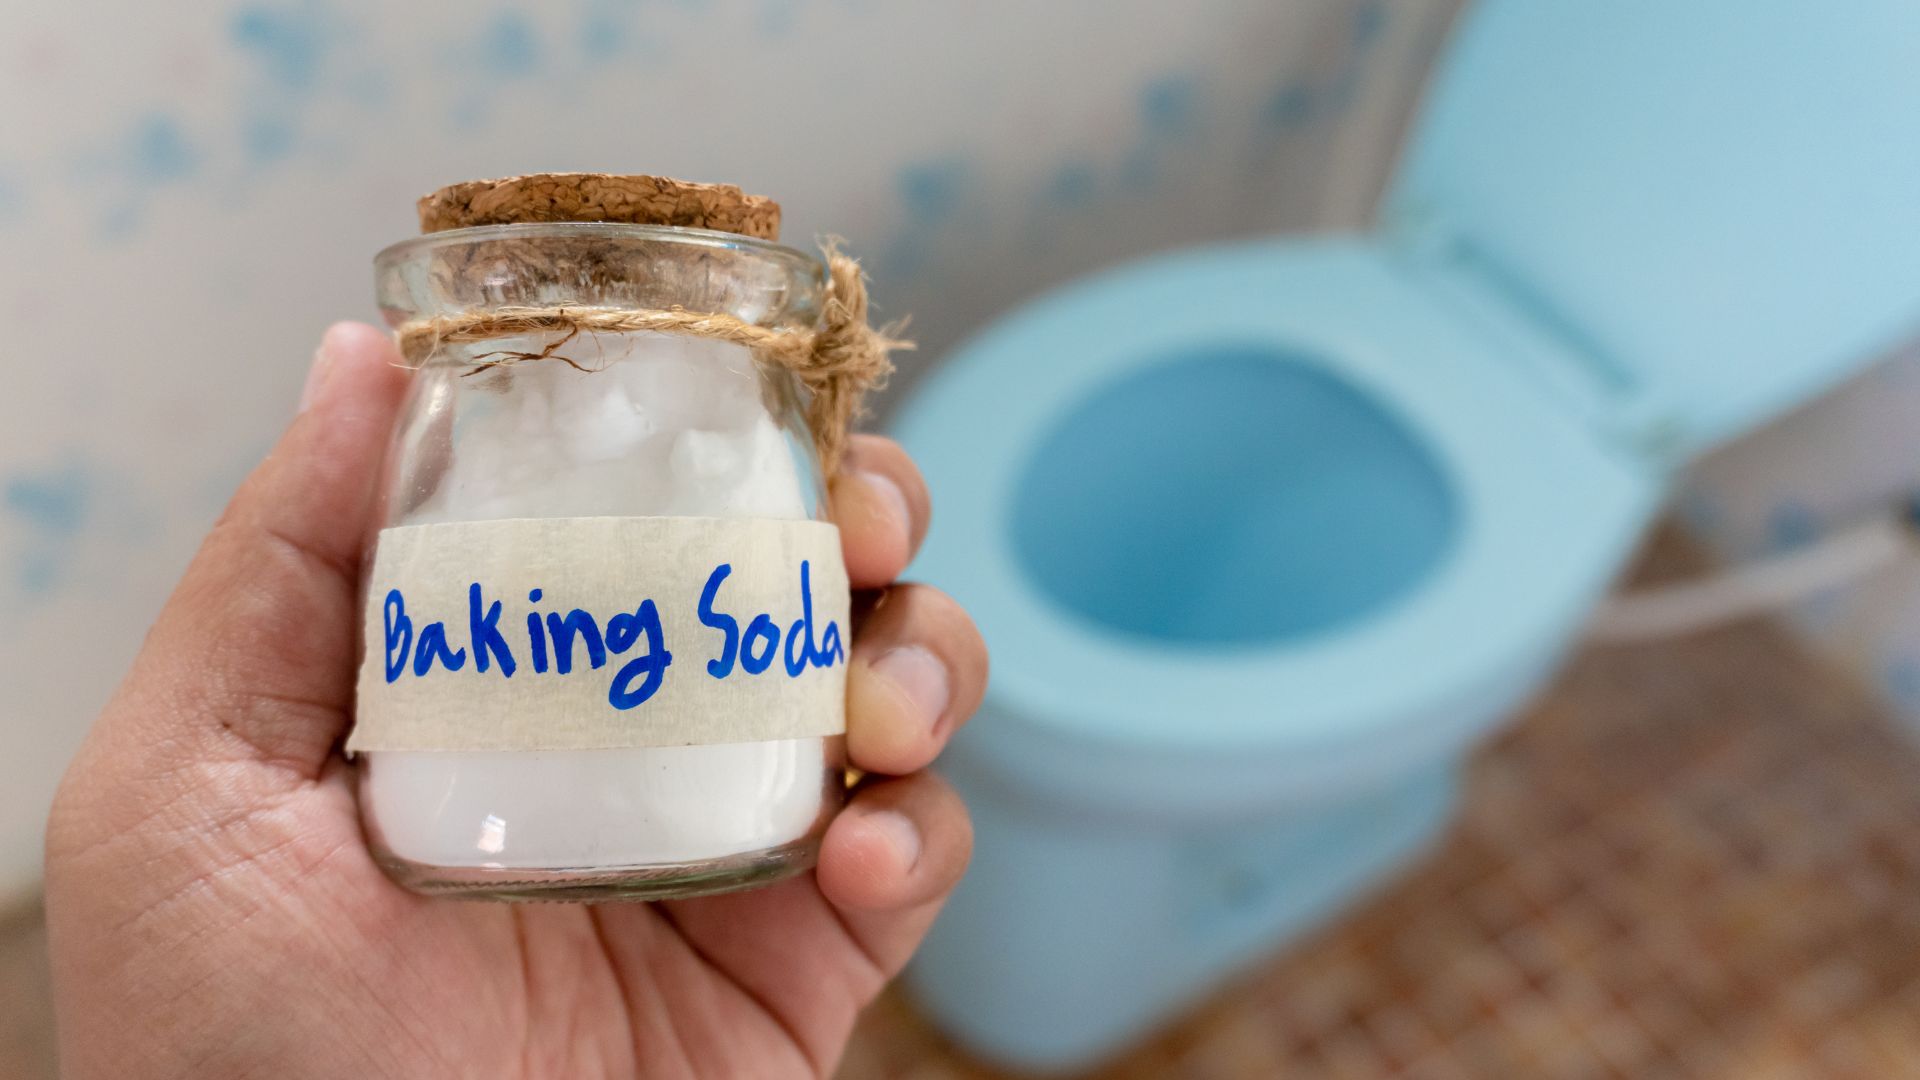 Utilizing the baking soda and vinegar method to unclog a toilet with the expertise of plumbers.